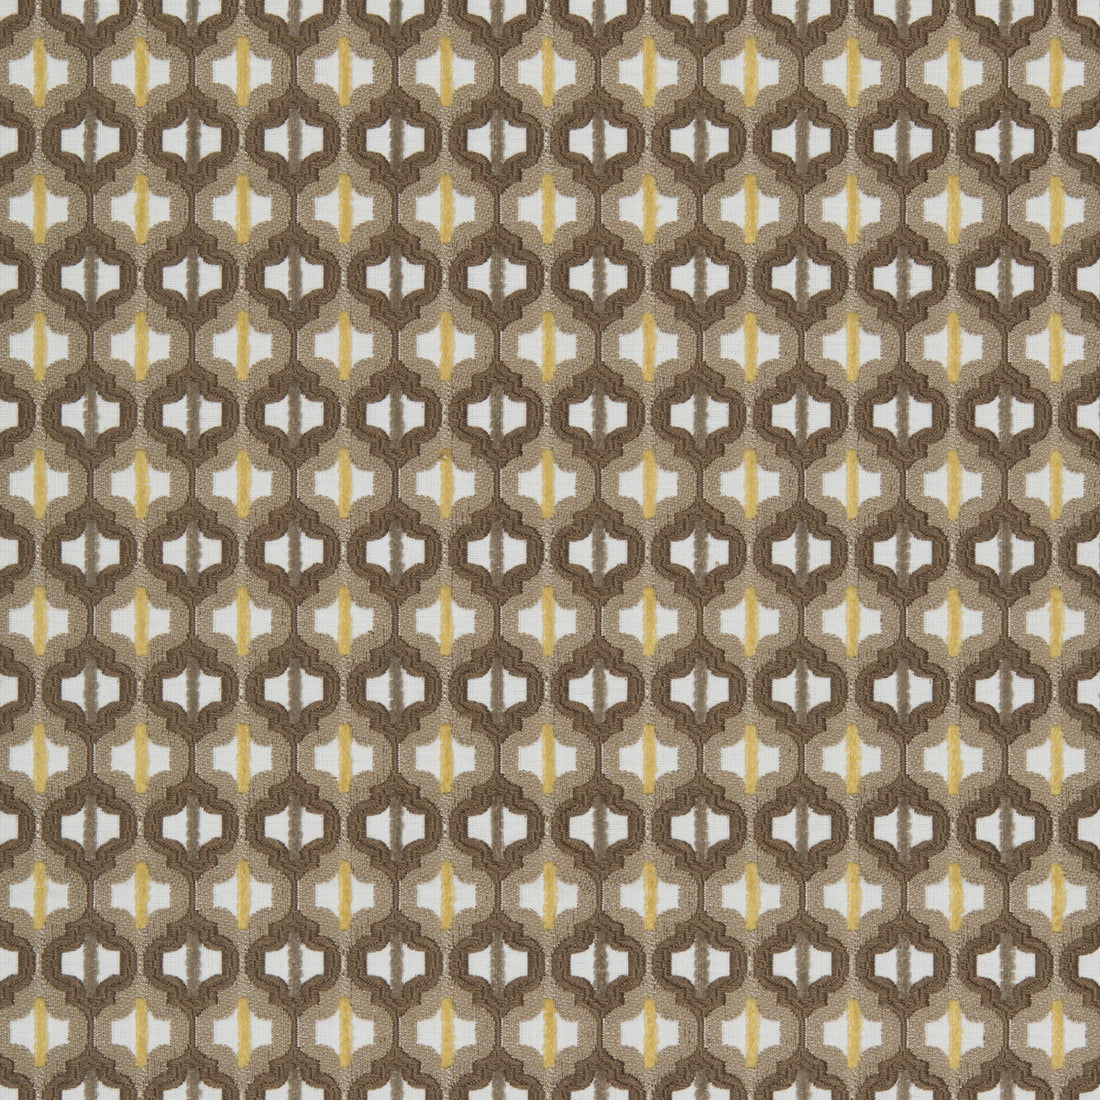 Turned Out Tile fabric in tiger eye color - pattern 34794.16.0 - by Kravet Couture in the David Phoenix Well-Suited collection